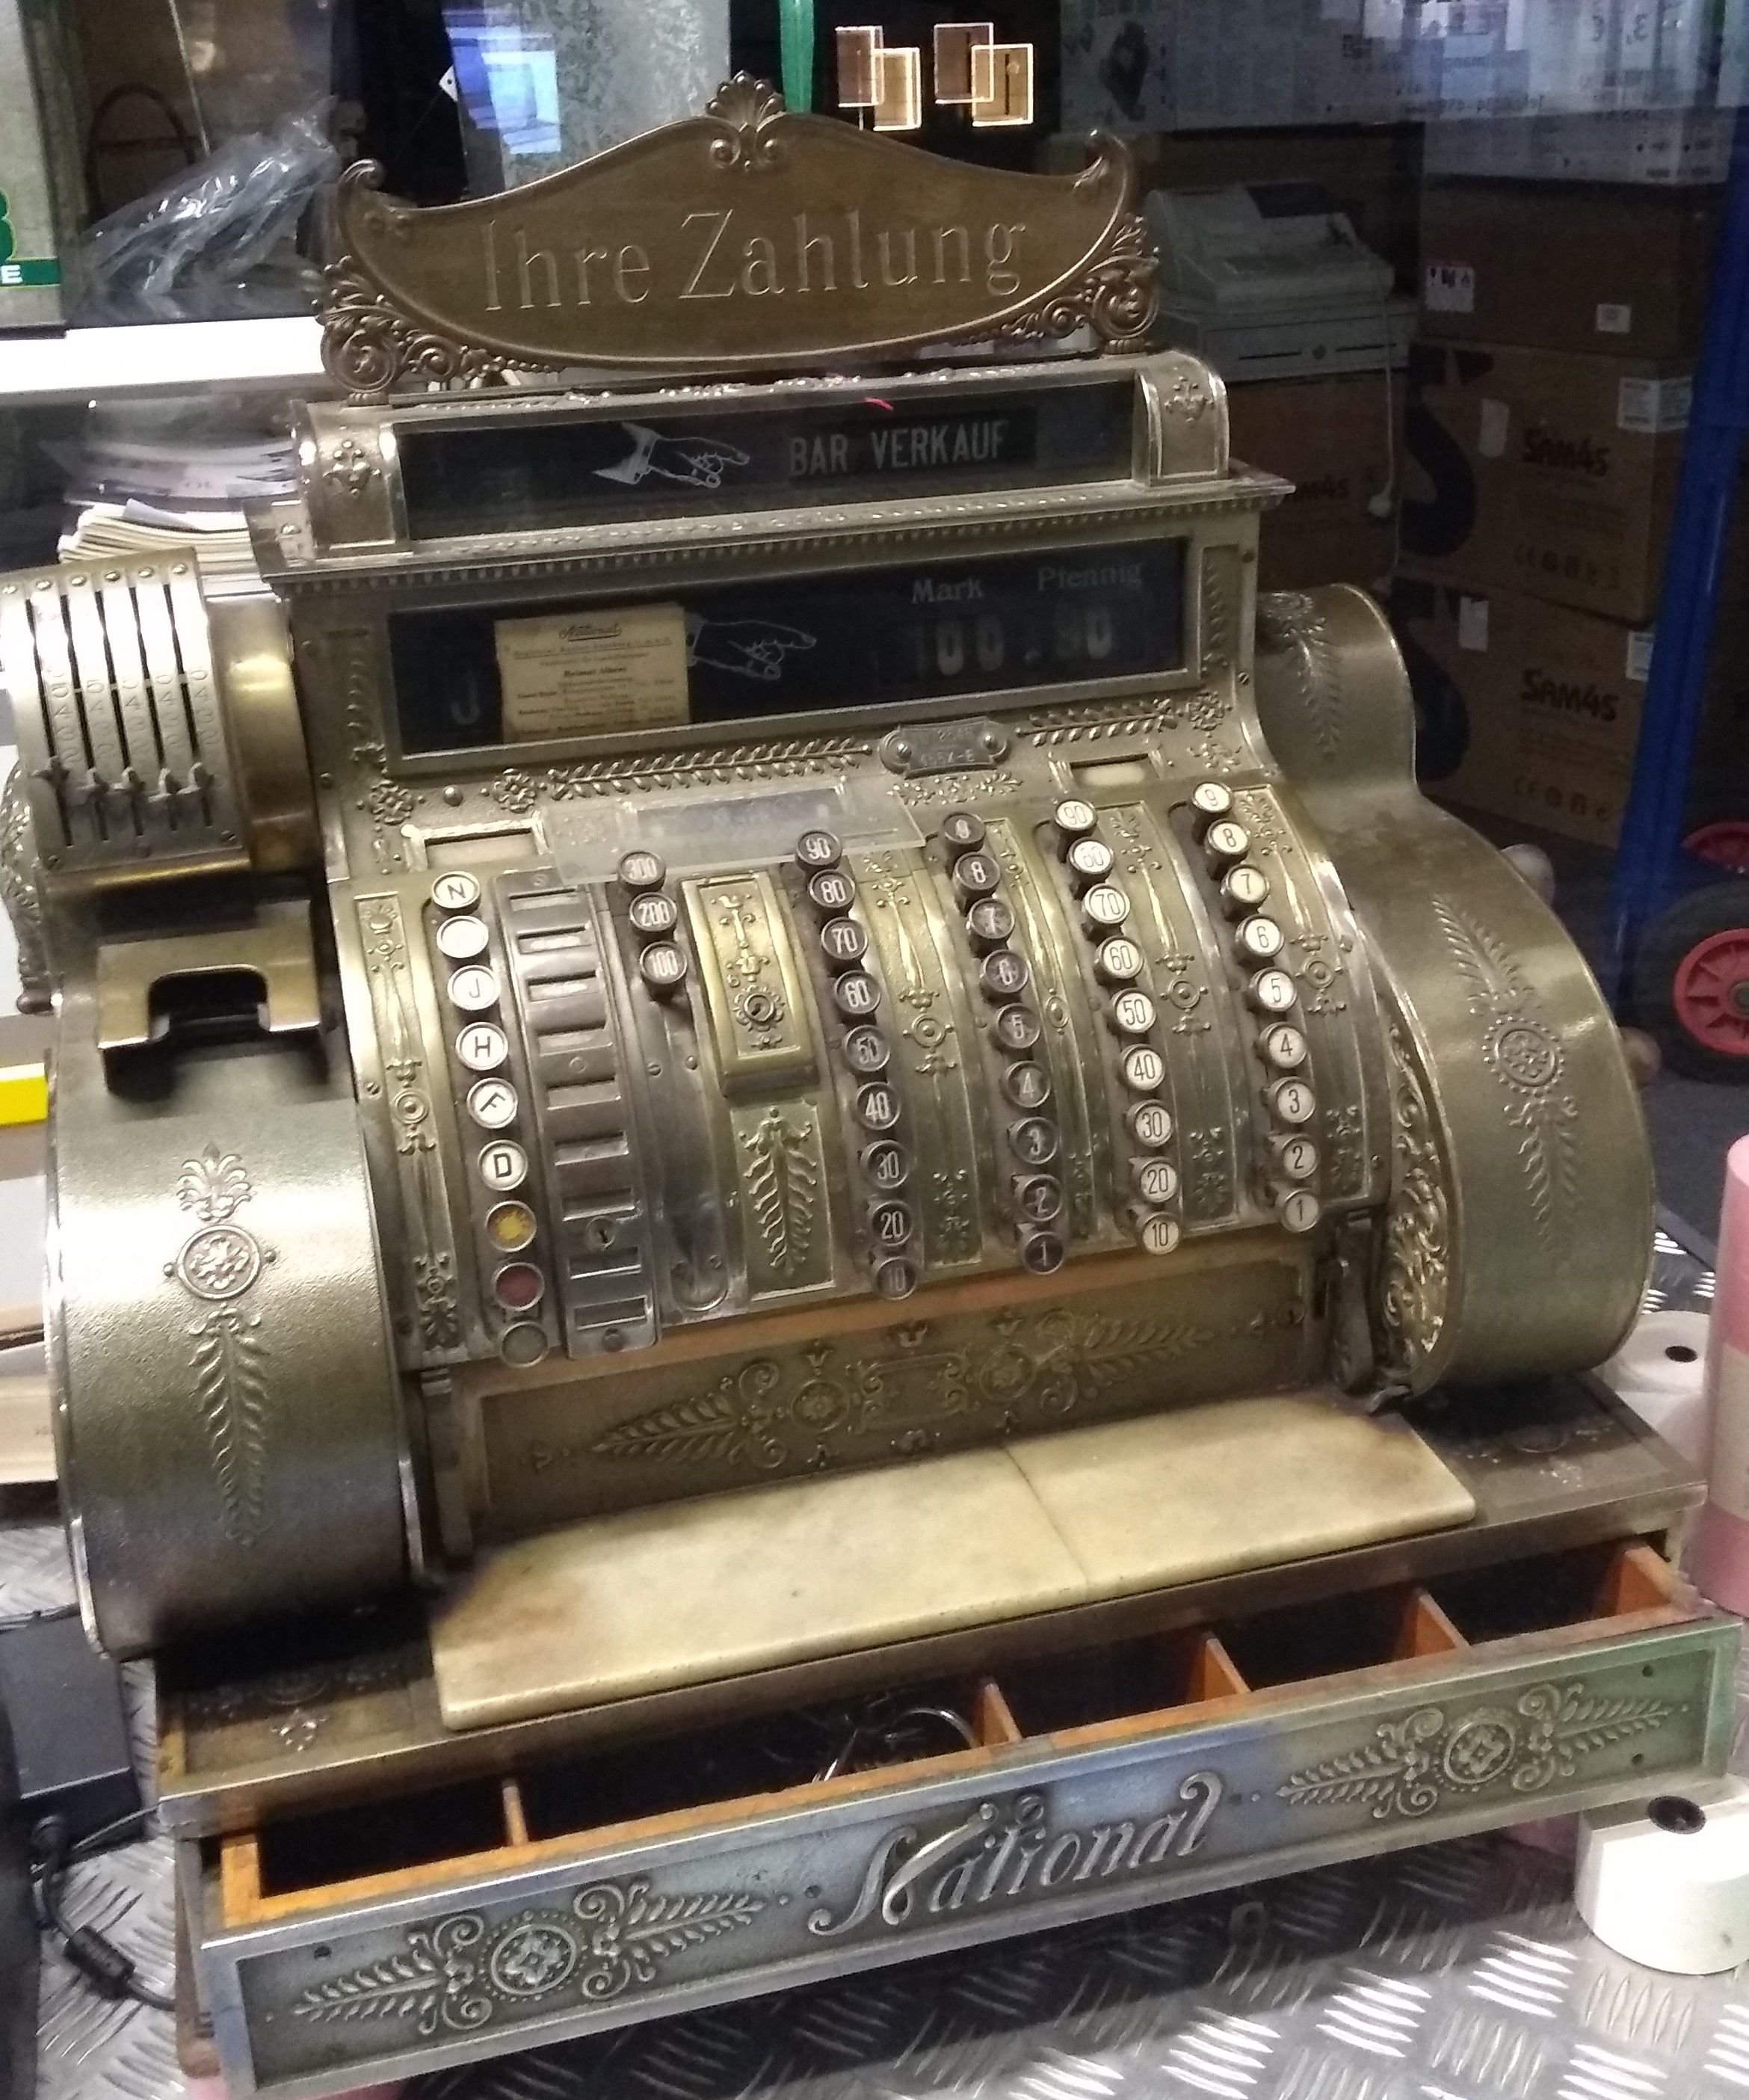 An old cash register in a shop we walked by